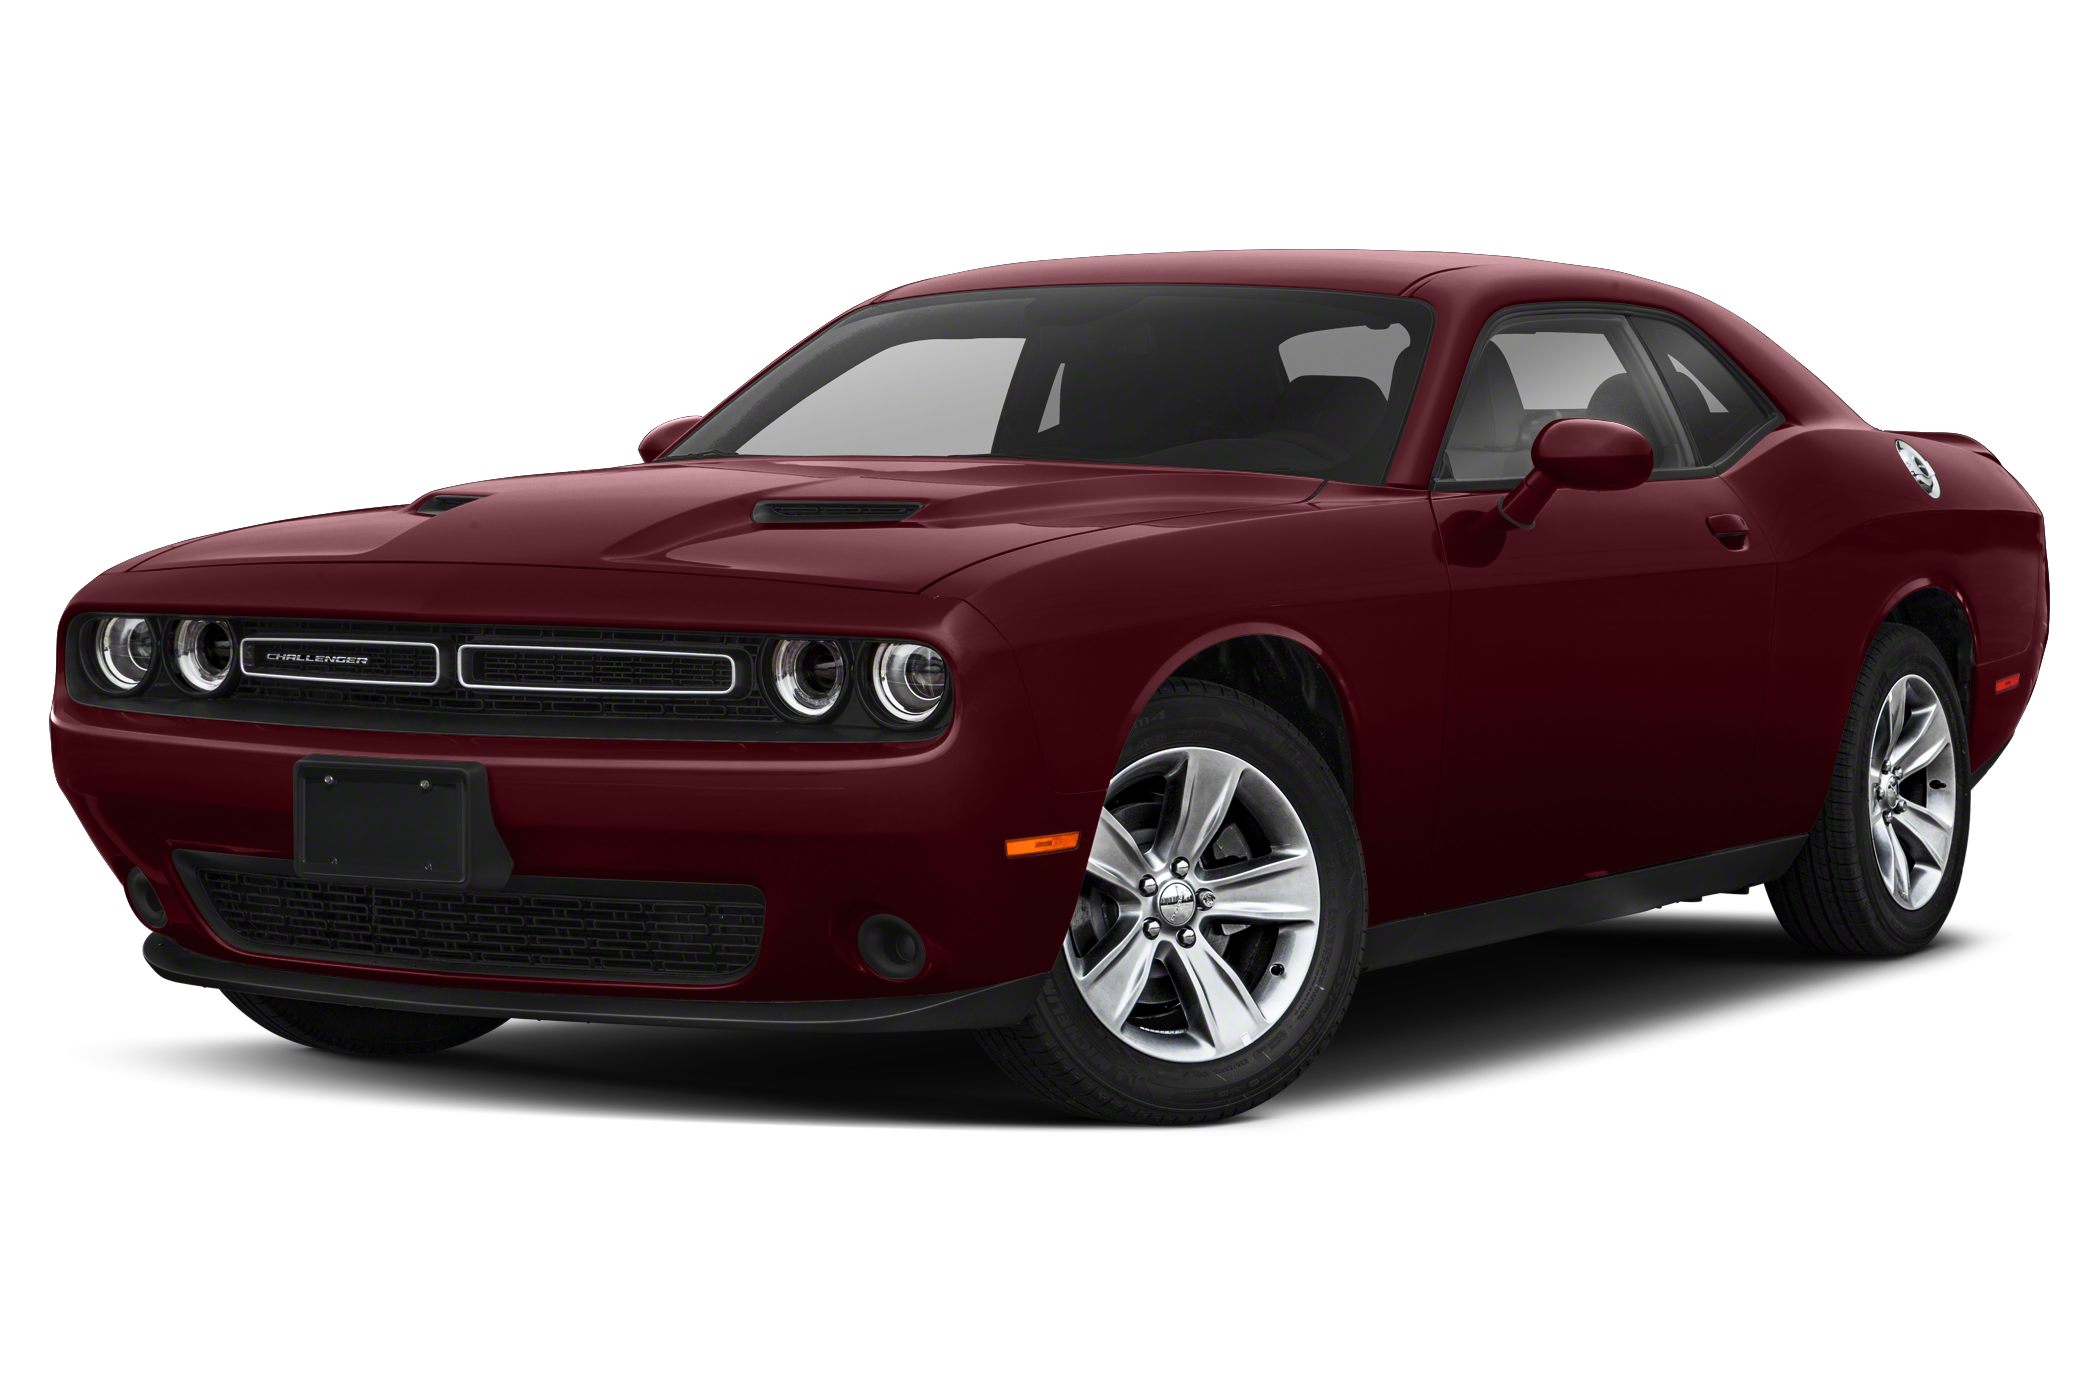 2019 Dodge Challenger Sxt 2dr All Wheel Drive Coupe Pictures